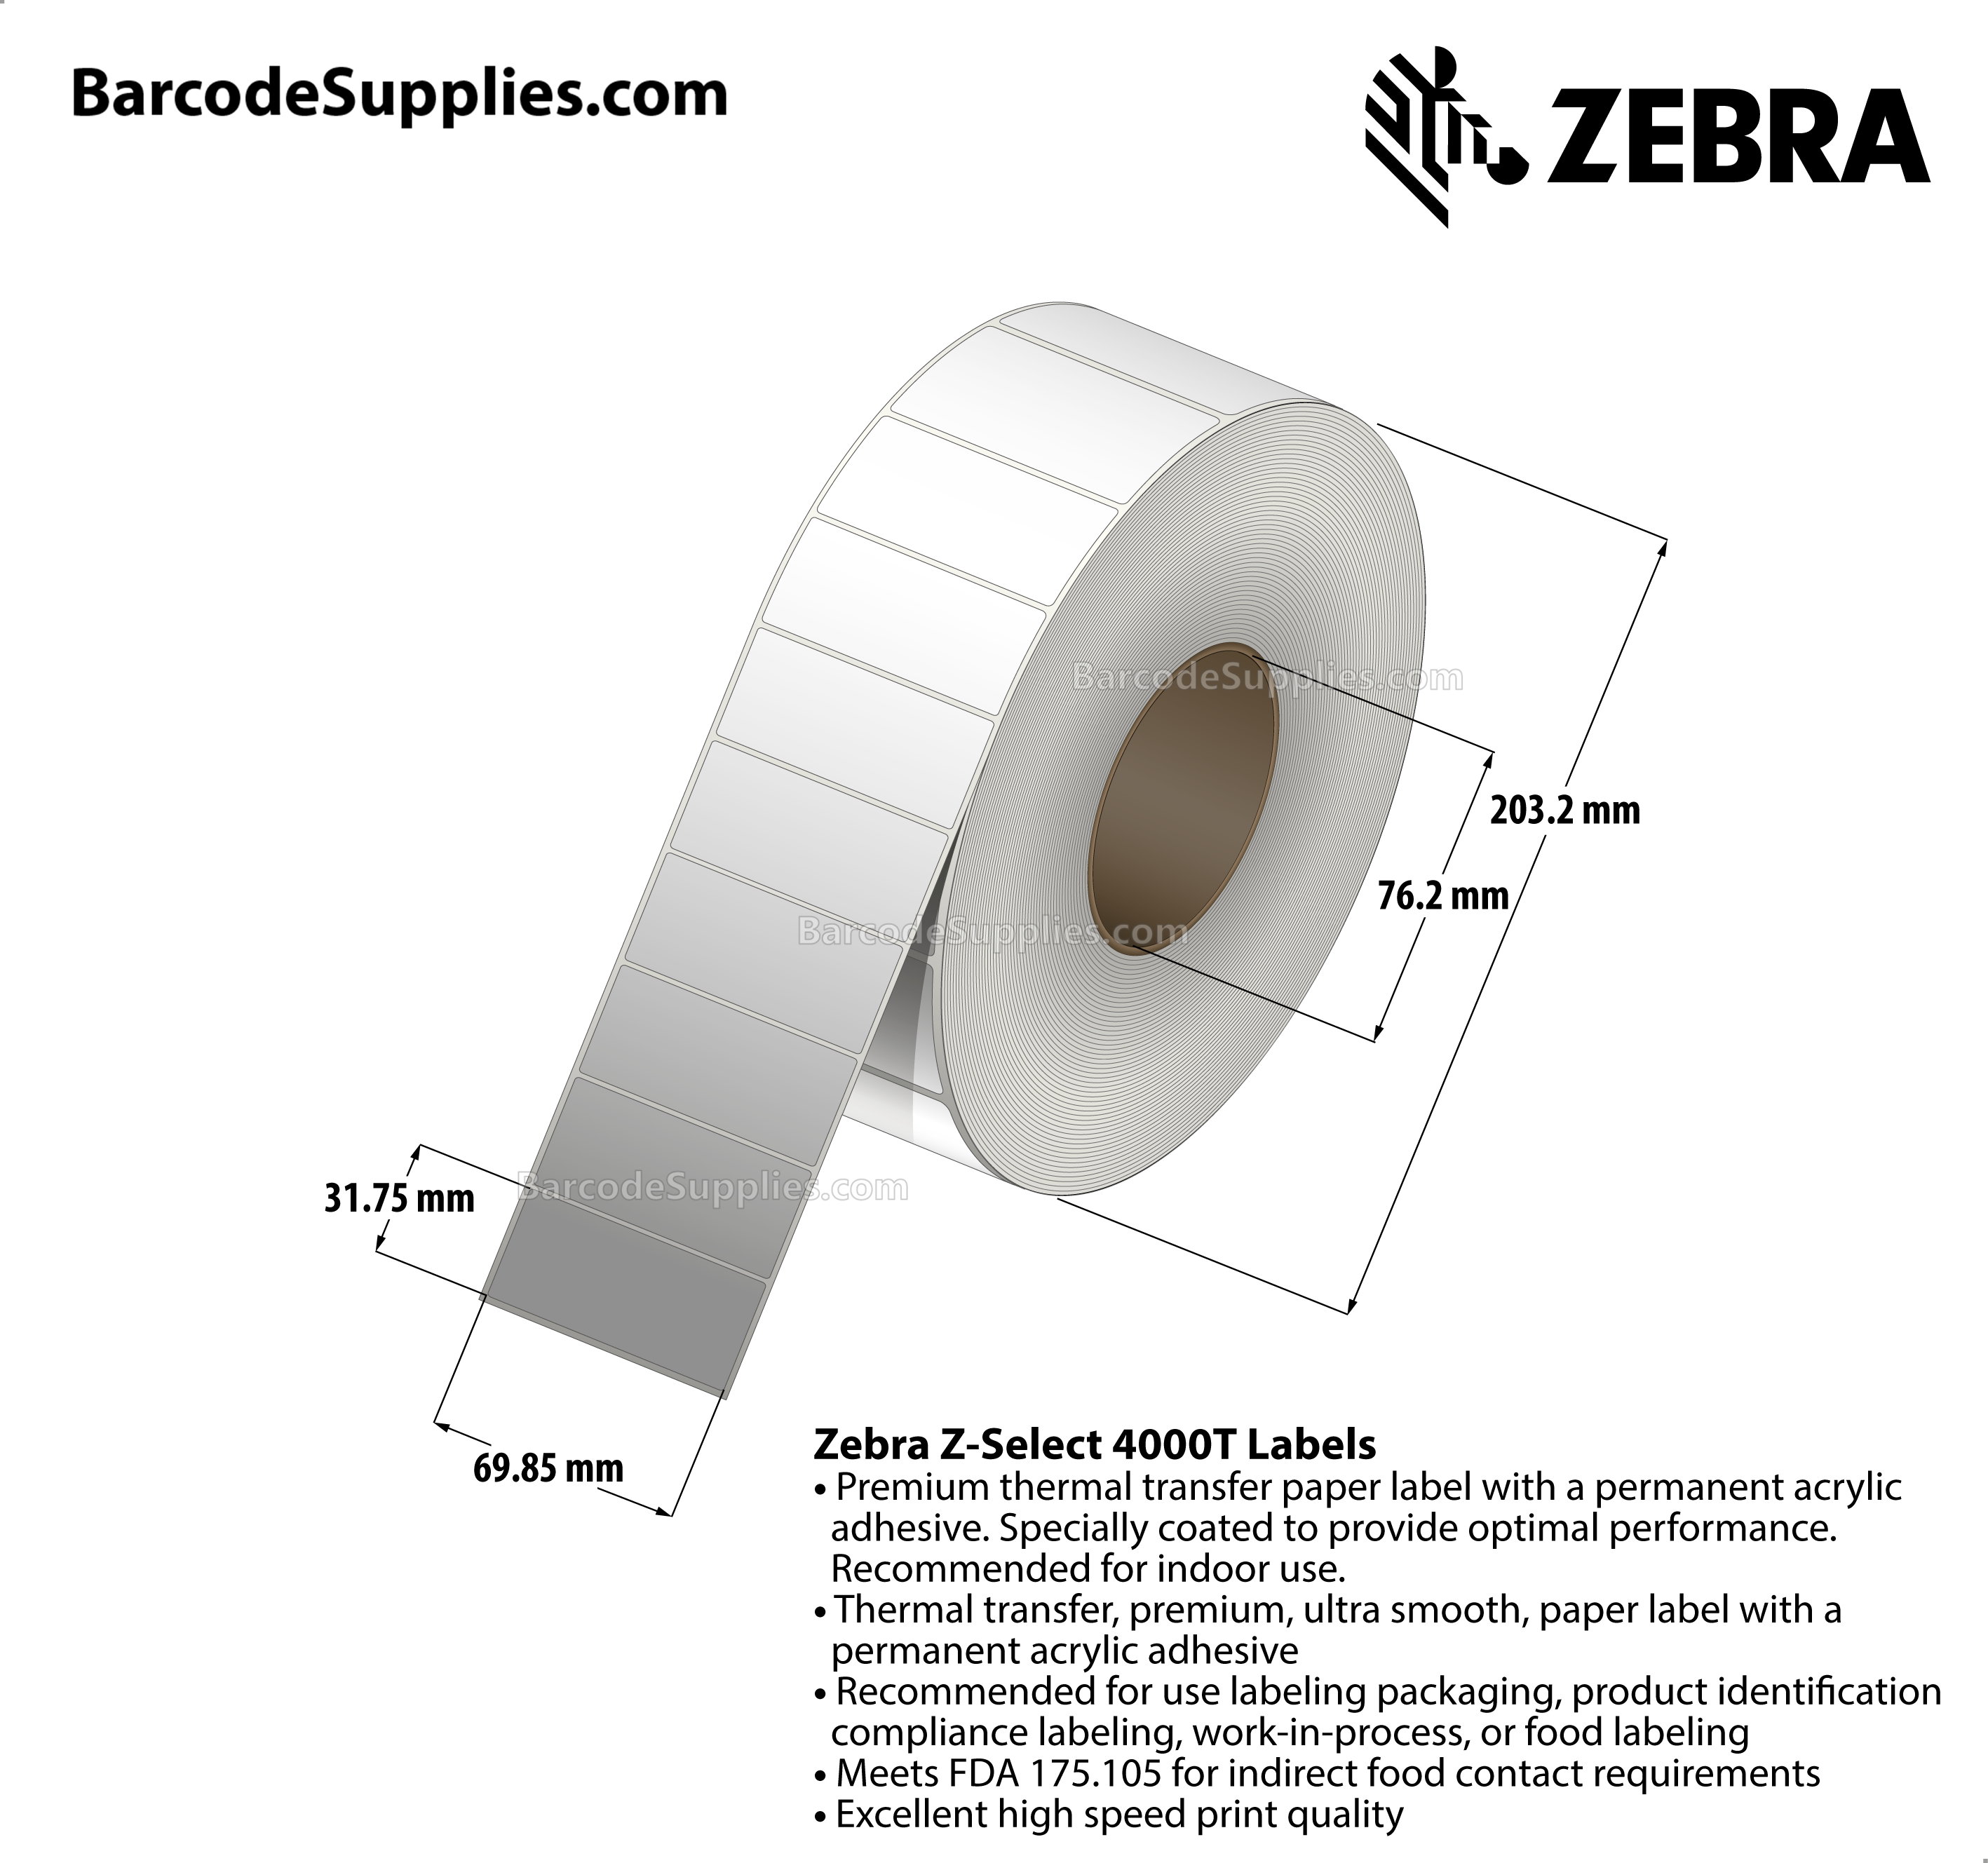 2.75 x 1.25 Thermal Transfer White Z-Select 4000T Labels With Permanent Adhesive - Not Perforated - 4240 Labels Per Roll - Carton Of 8 Rolls - 33920 Labels Total - MPN: 72282